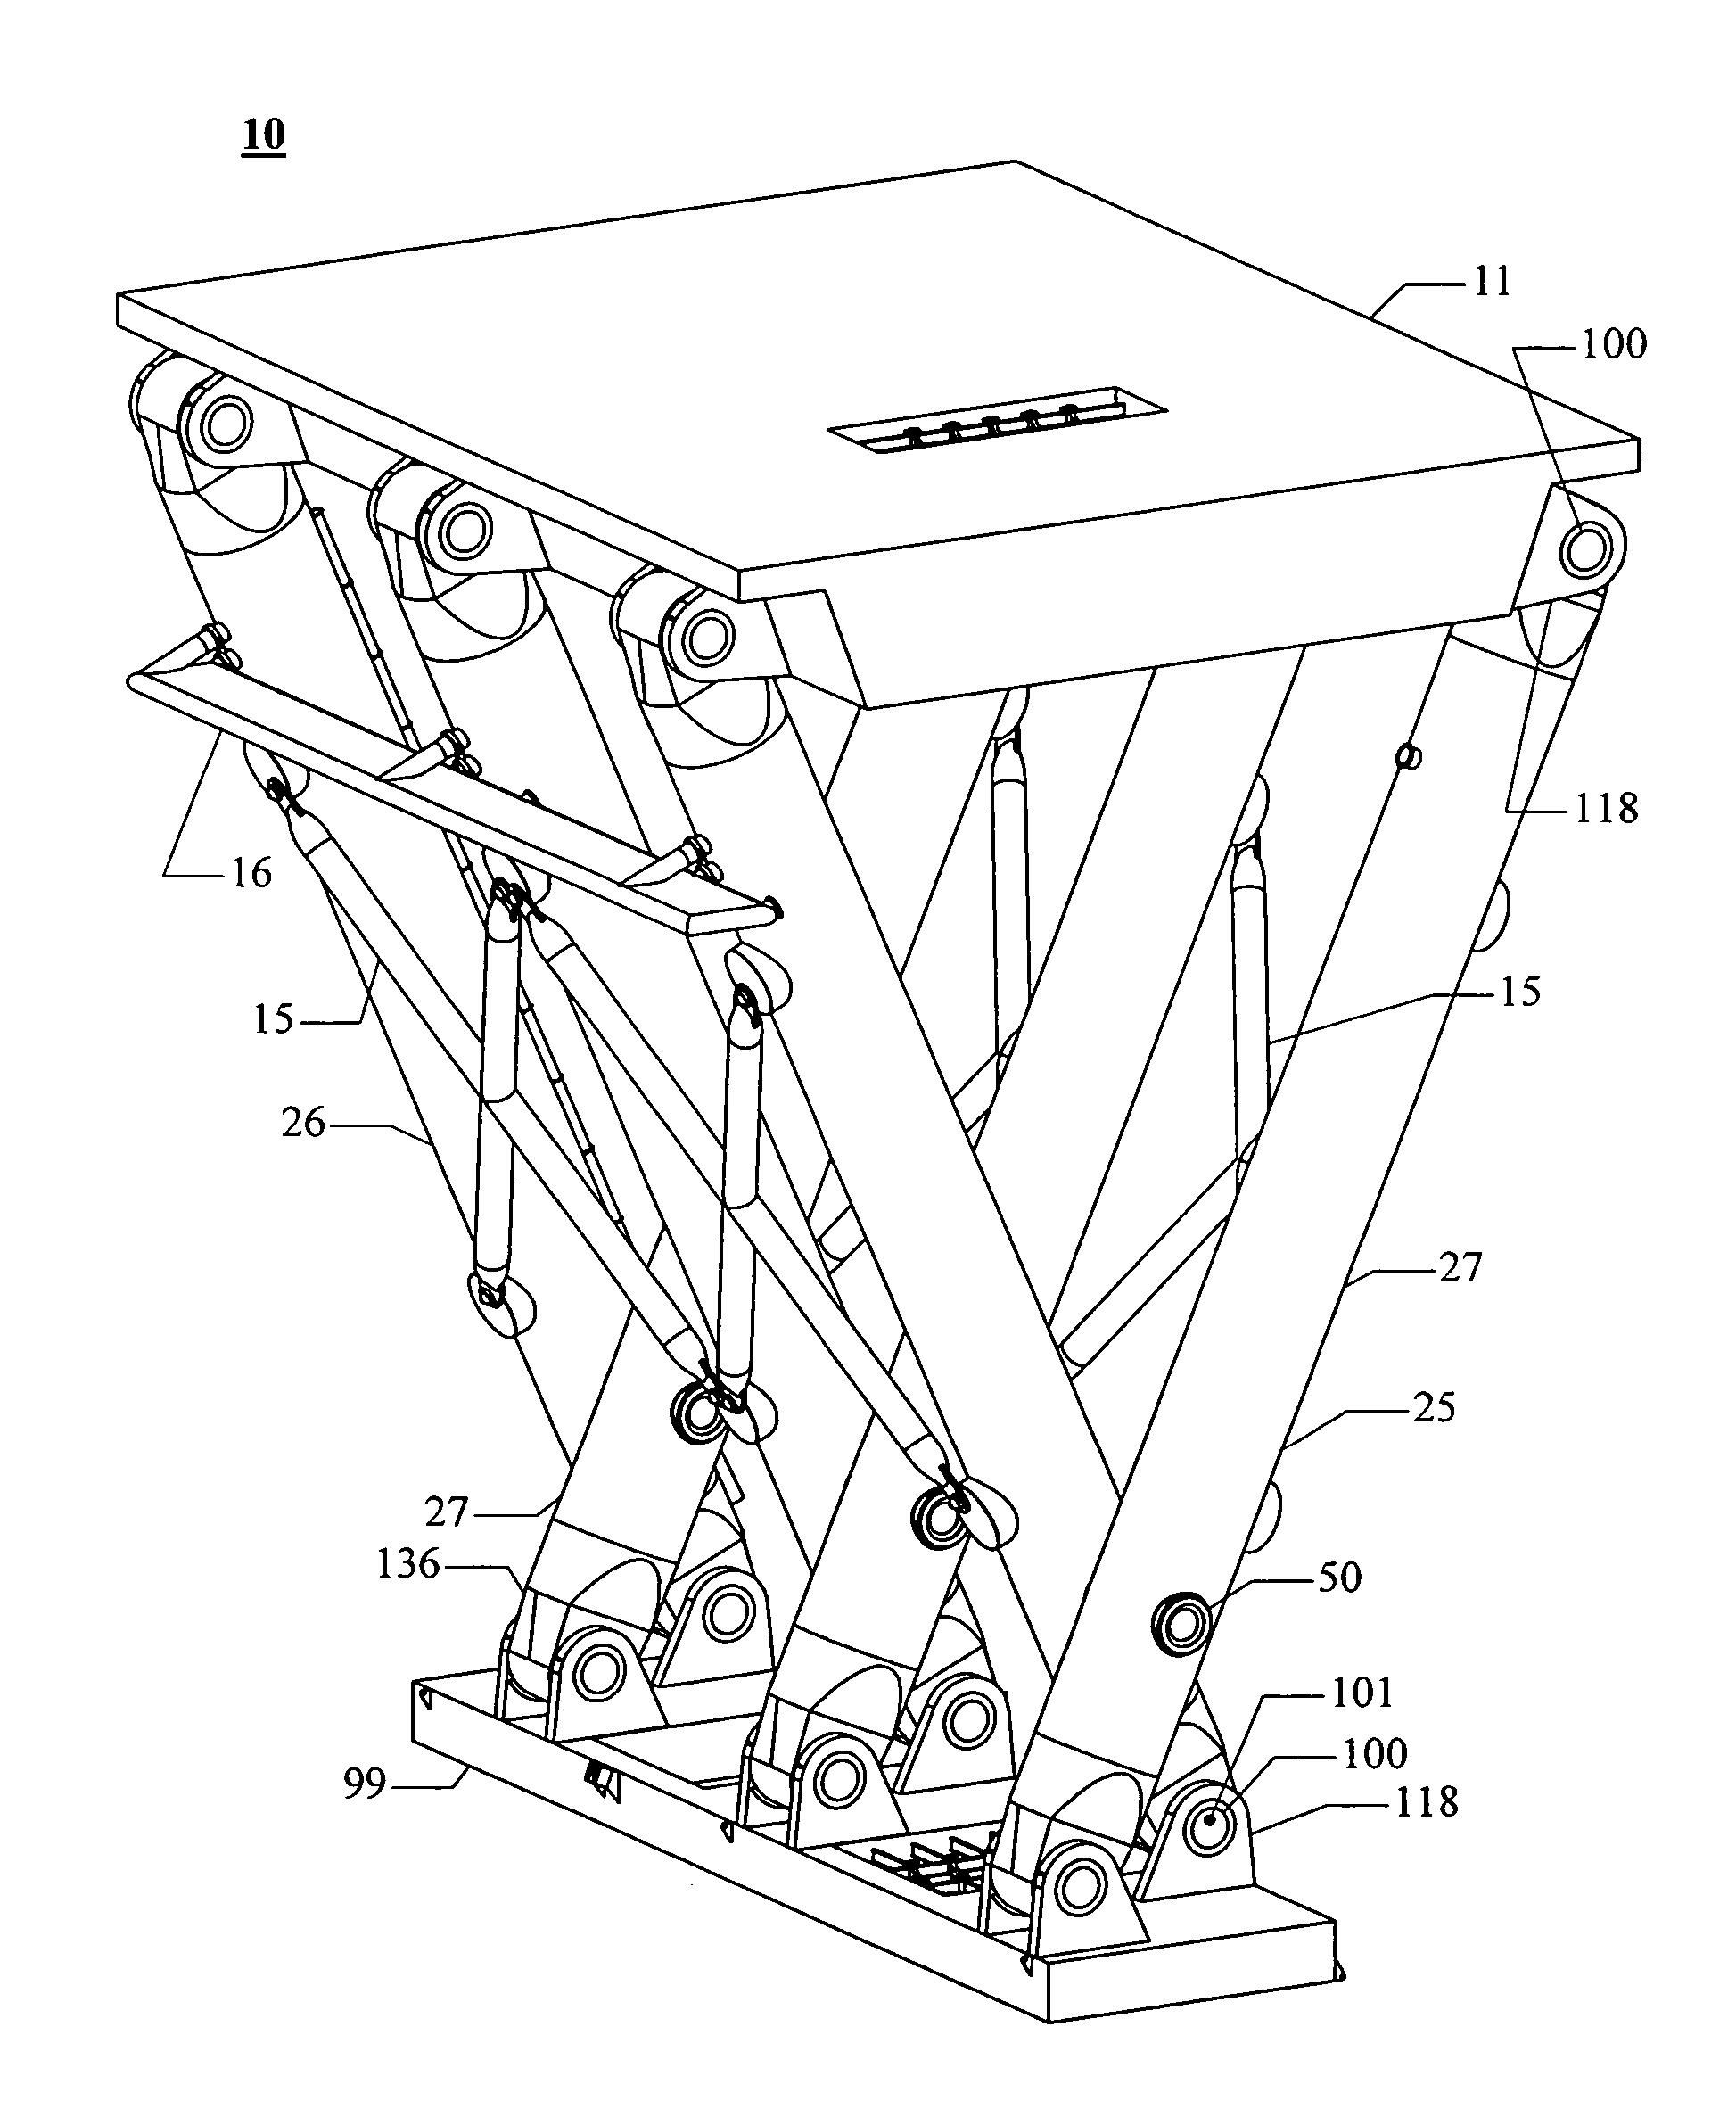 Lubrication system for pin connections